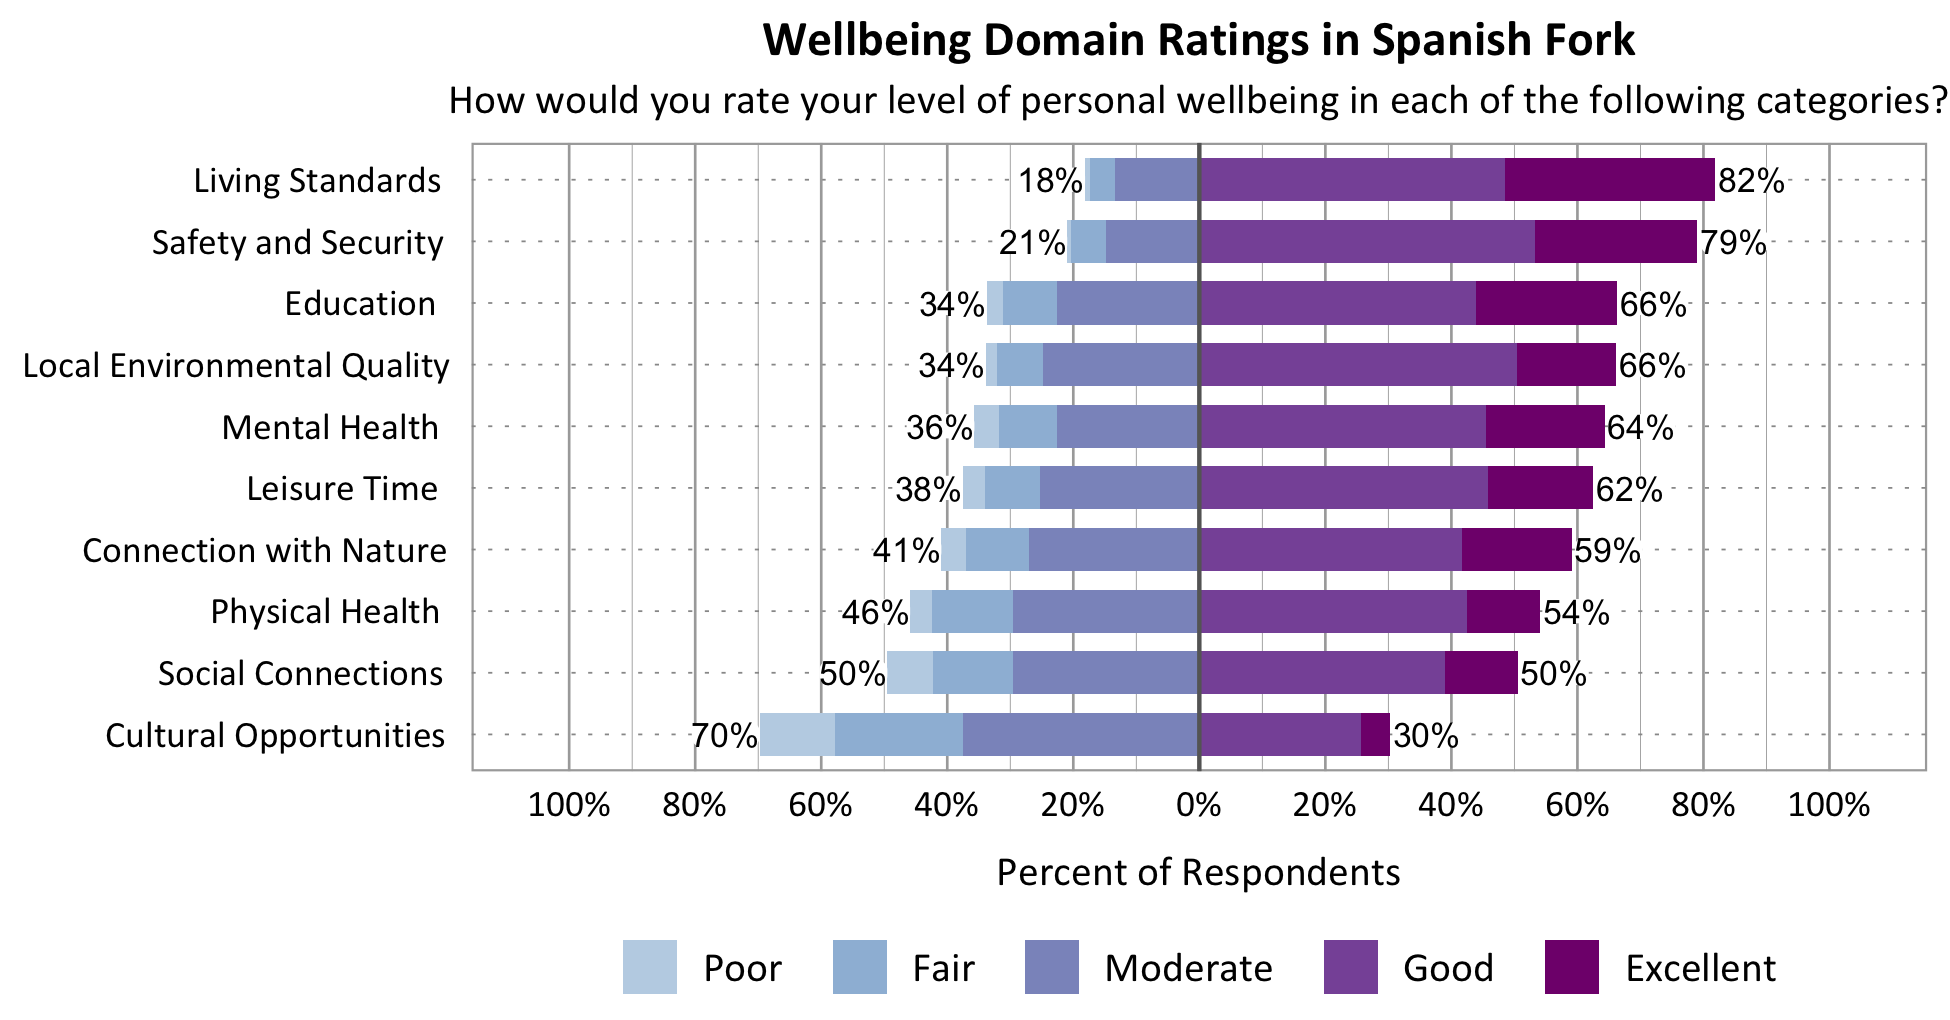 Likert Graph. Title: Wellbeing Domain Ratings in Spanish Fork Subtitle: How would you rate your level of personal wellbeing in each of the following categories? Category: Safety and Security - 21% of respondents rated as poor, fair, or moderate while 79% rated as good or excellent; Category: Living Standards - 18% of respondents rated as poor, fair, or moderate while 82% rated as good or excellent; Category: Education - 34% of respondents rated as poor, fair, or moderate while 66% rated as good or excellent; Category: Connection with Nature - 41% of respondents rated as poor, fair, or moderate while 59% rated as good or excellent; Category: Mental Health - 36% of respondents rated as poor, fair, or moderate while 64% rated as good or excellent; Category: Local Environmental Quality - 34% of respondents rated as poor, fair, or moderate while 66% rated as good or excellent; Category: Physical Health - 46% of respondents rated as poor, fair, or moderate while 54% rated as good or excellent; Category: Leisure Time - 38% of respondents rated as poor, fair or moderate while 62% rated as good or excellent; Category: Social Connections - 50% of respondents rated as poor, fair, or moderate while 50% rated as good or excellent; Category: Cultural Opportunities - 70% of respondents rated as poor, fair or moderate while 30% rated as good or excellent.